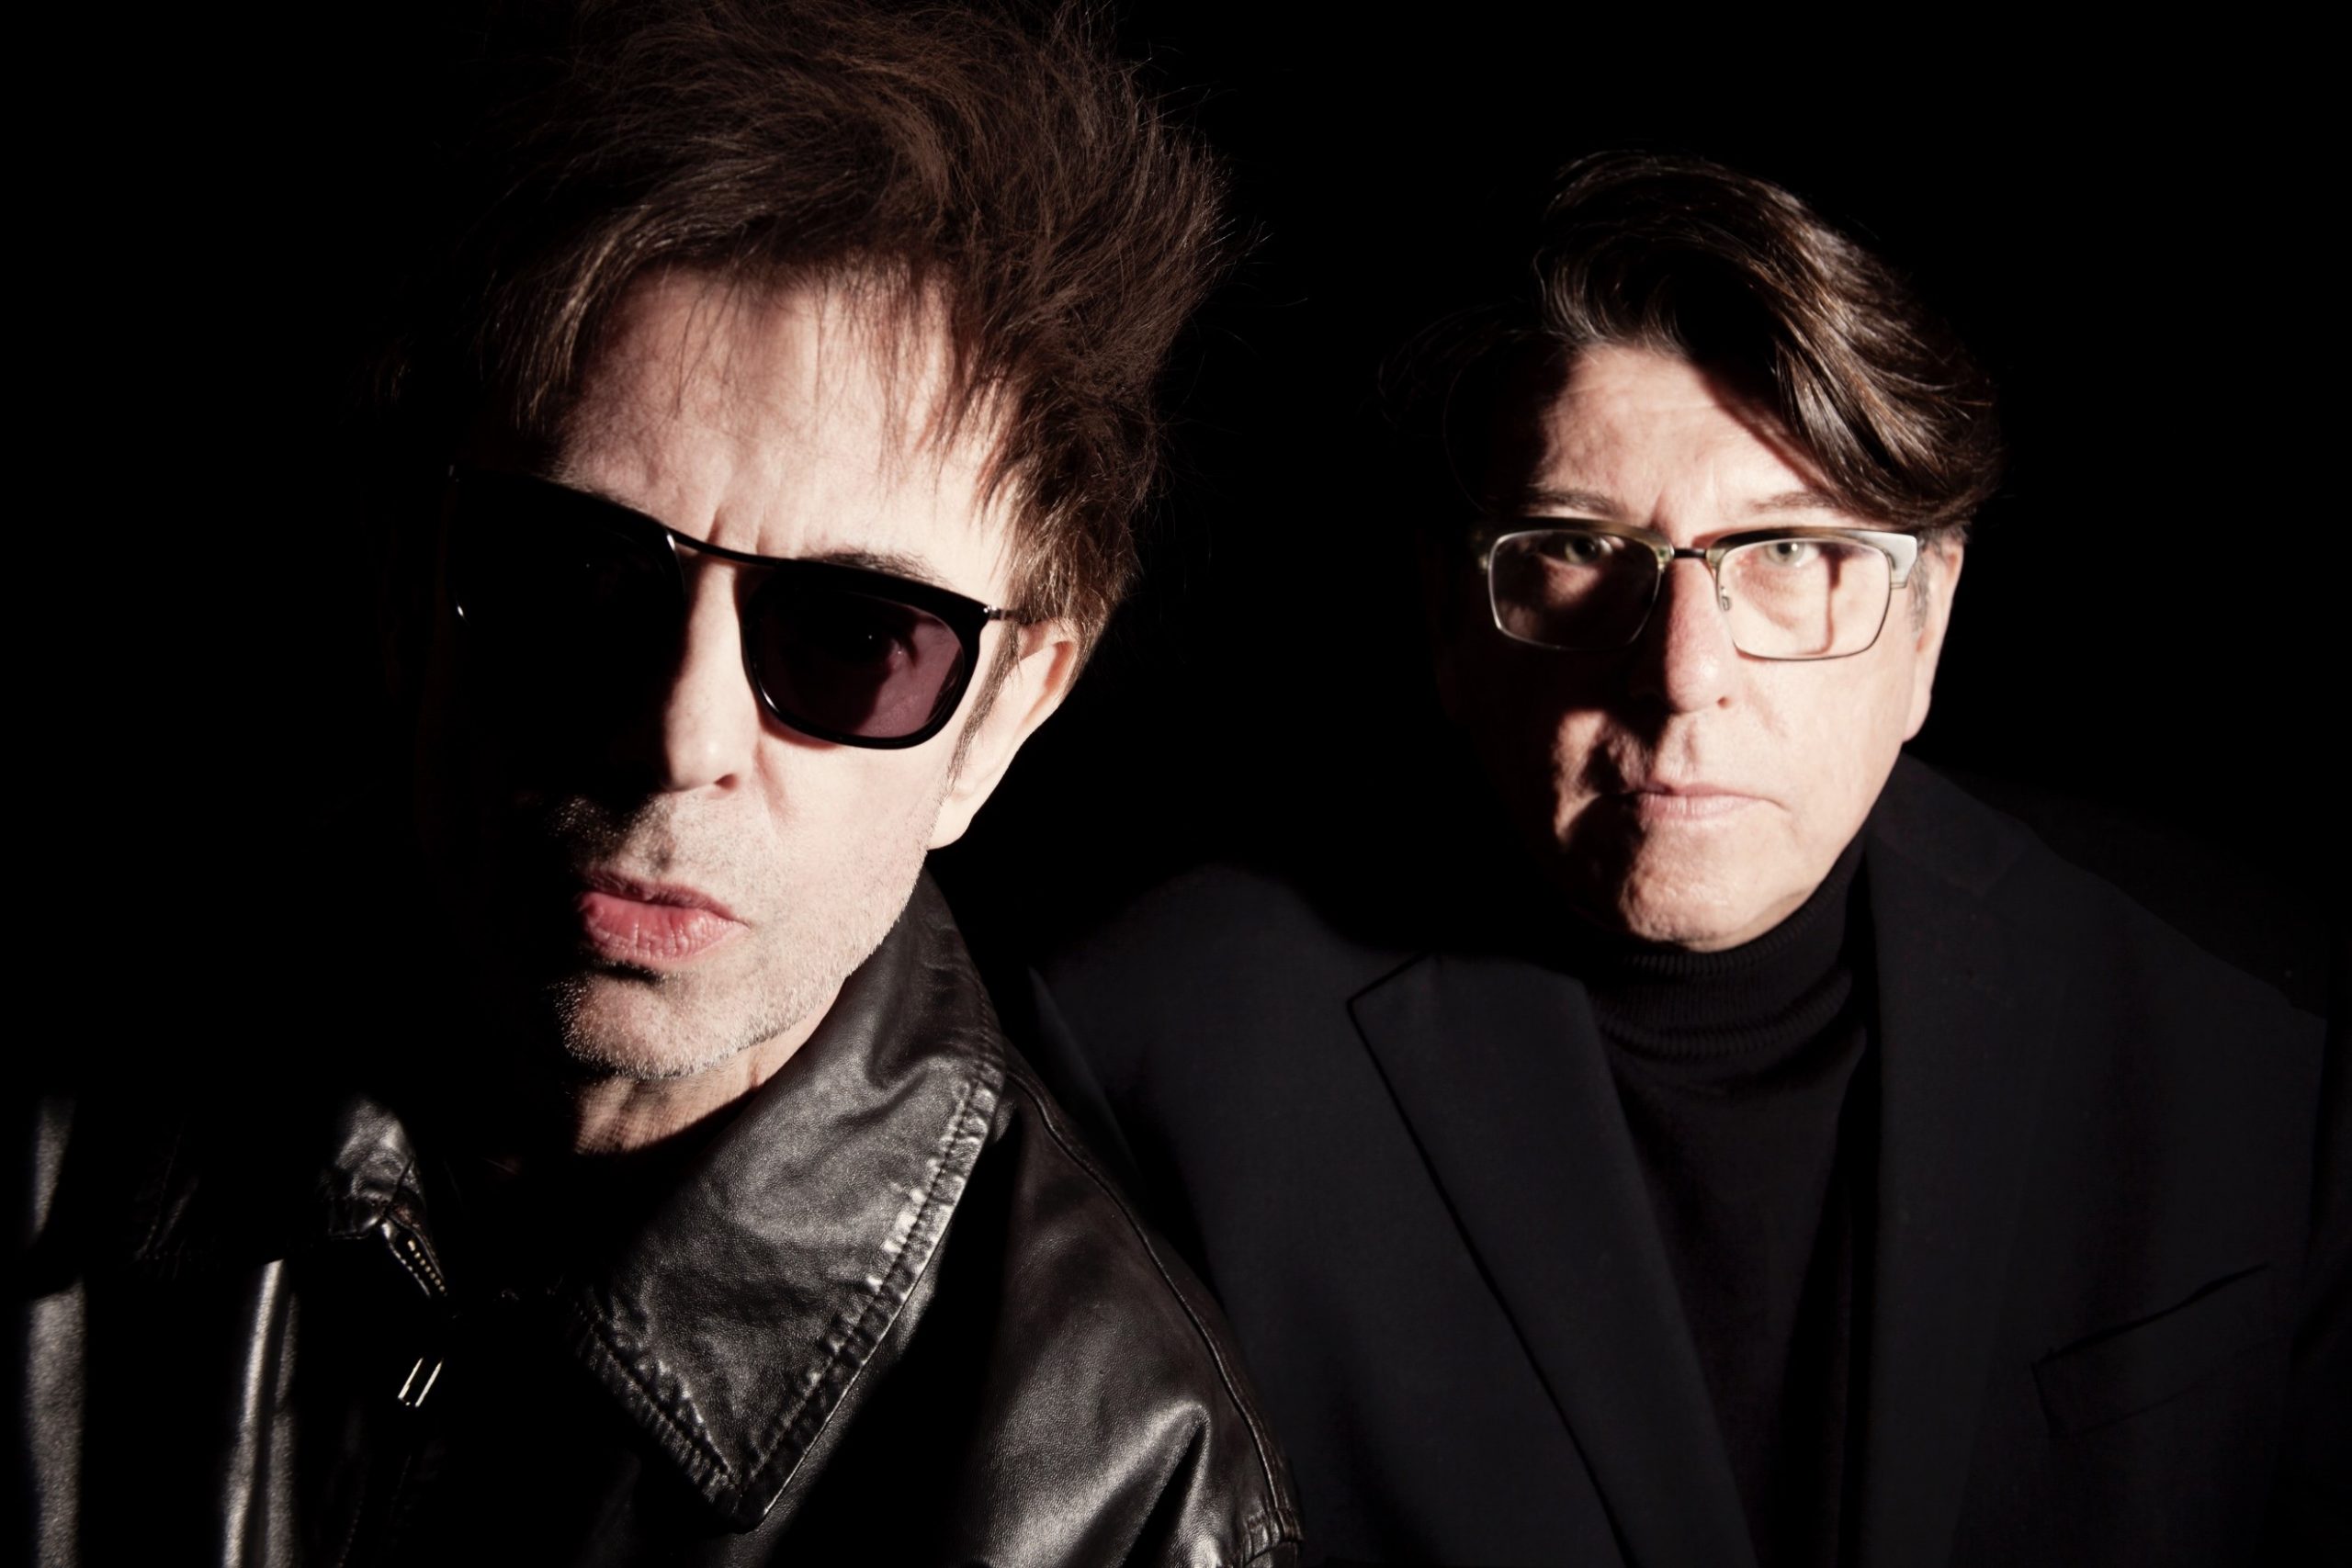 echo and bunnymen tour review